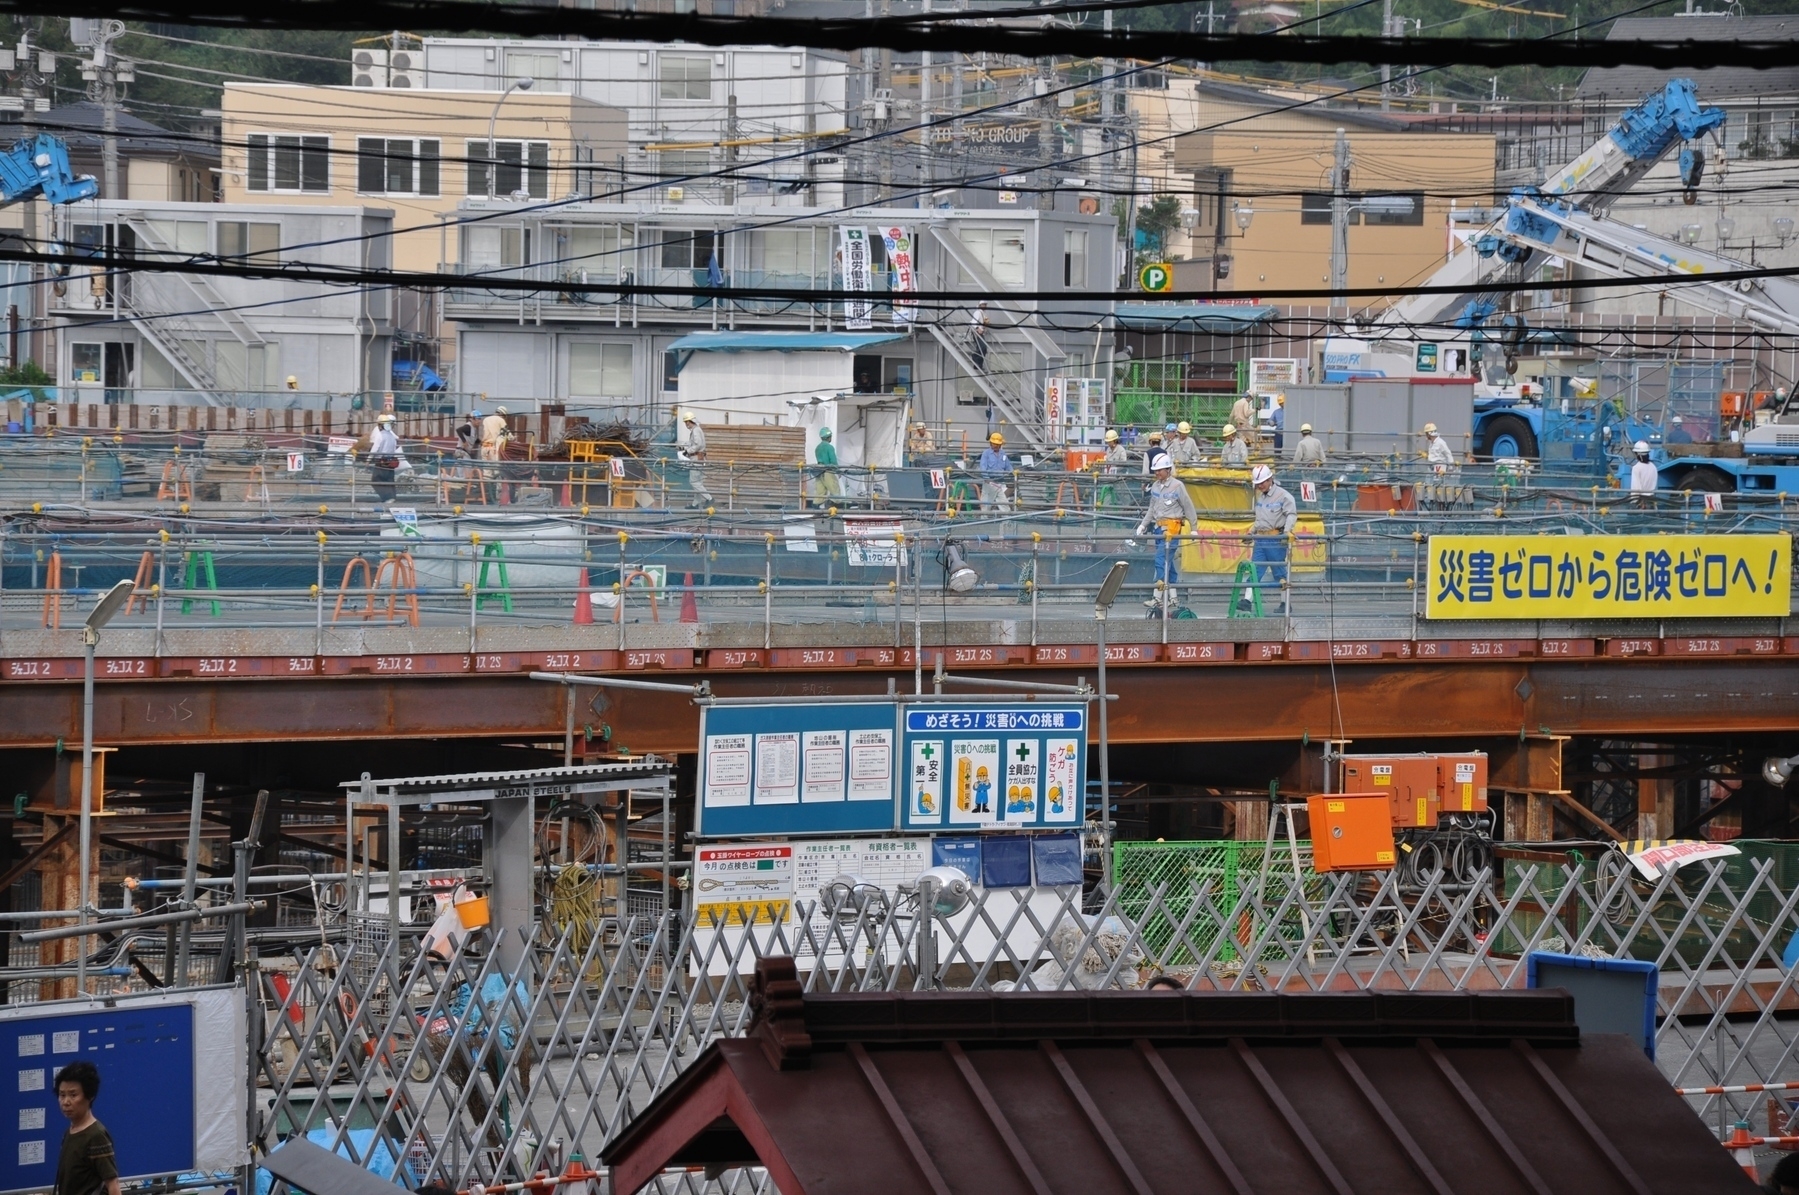 Photo of the Totsukana shopping center being constructed in 2008, JR Totsuka West entrance.